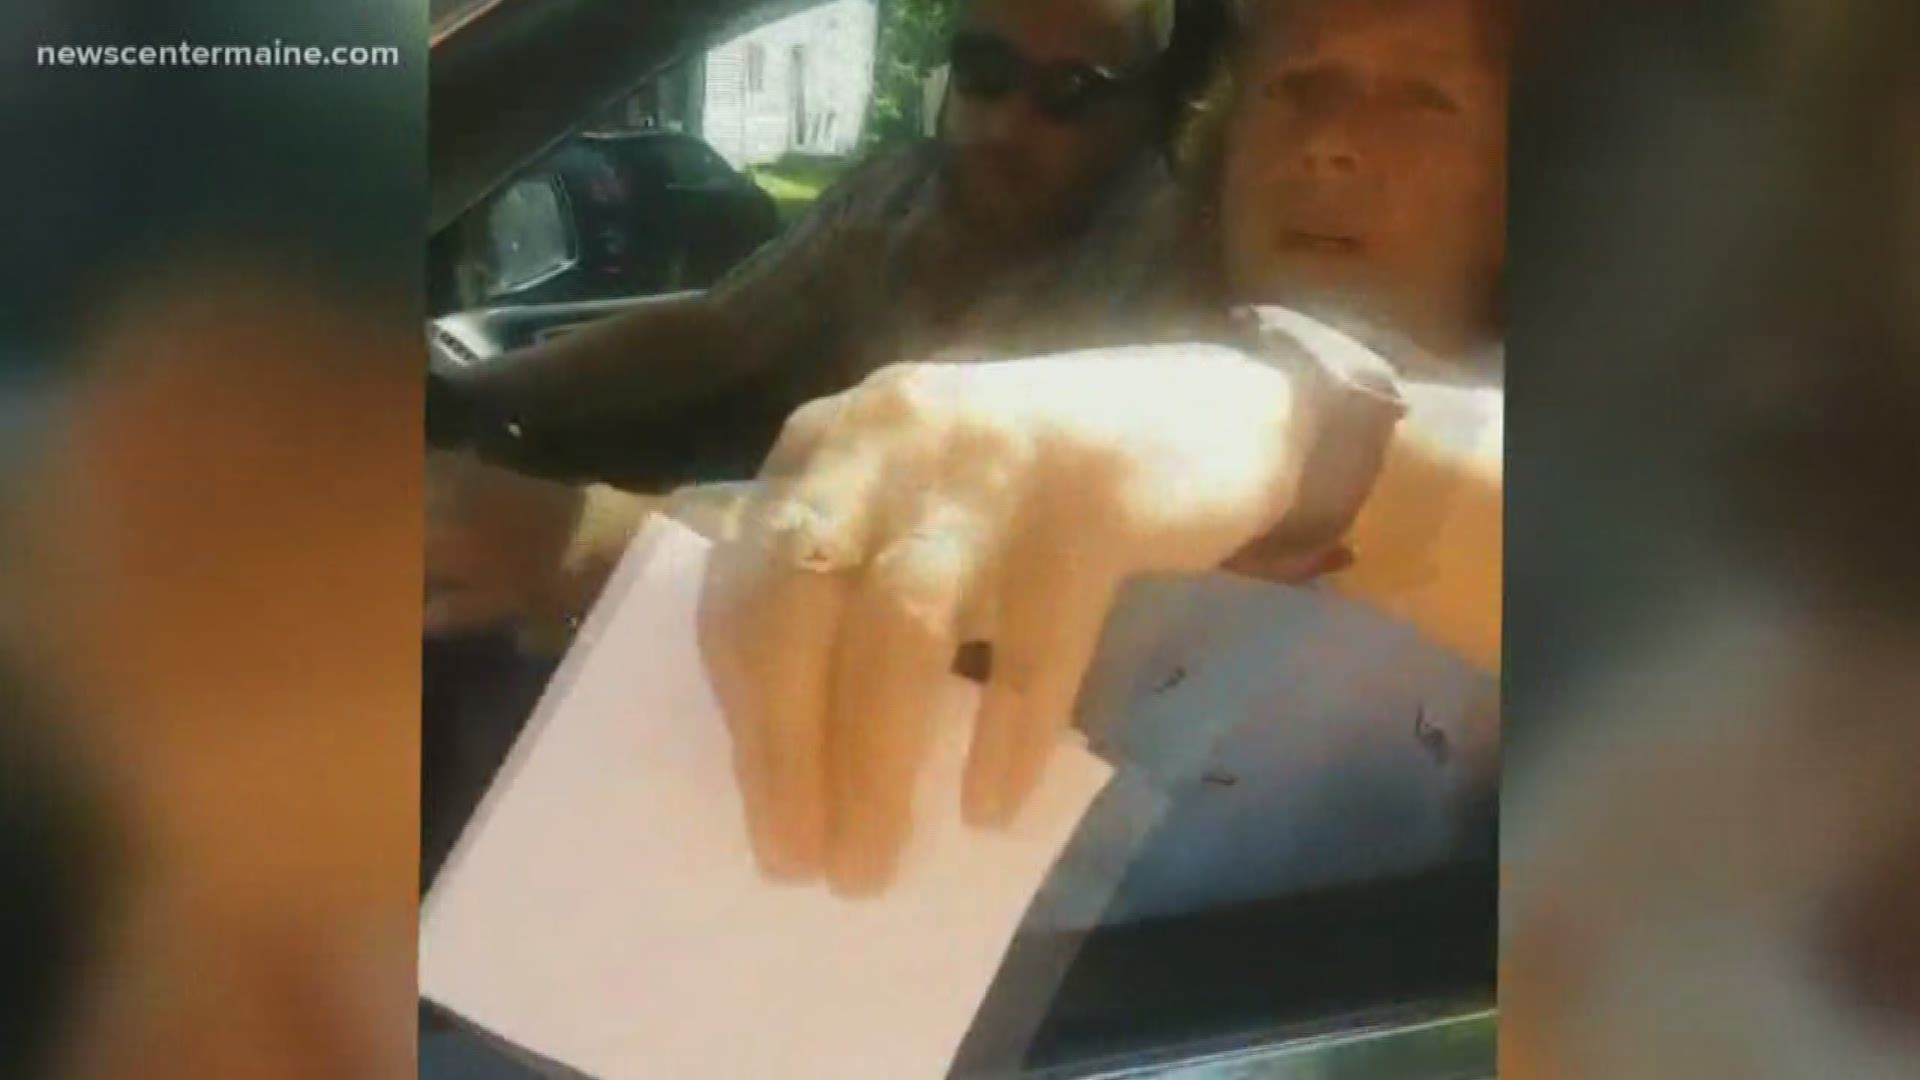 NOW: Viral video shows landlord handing Calais tenant eviction notice